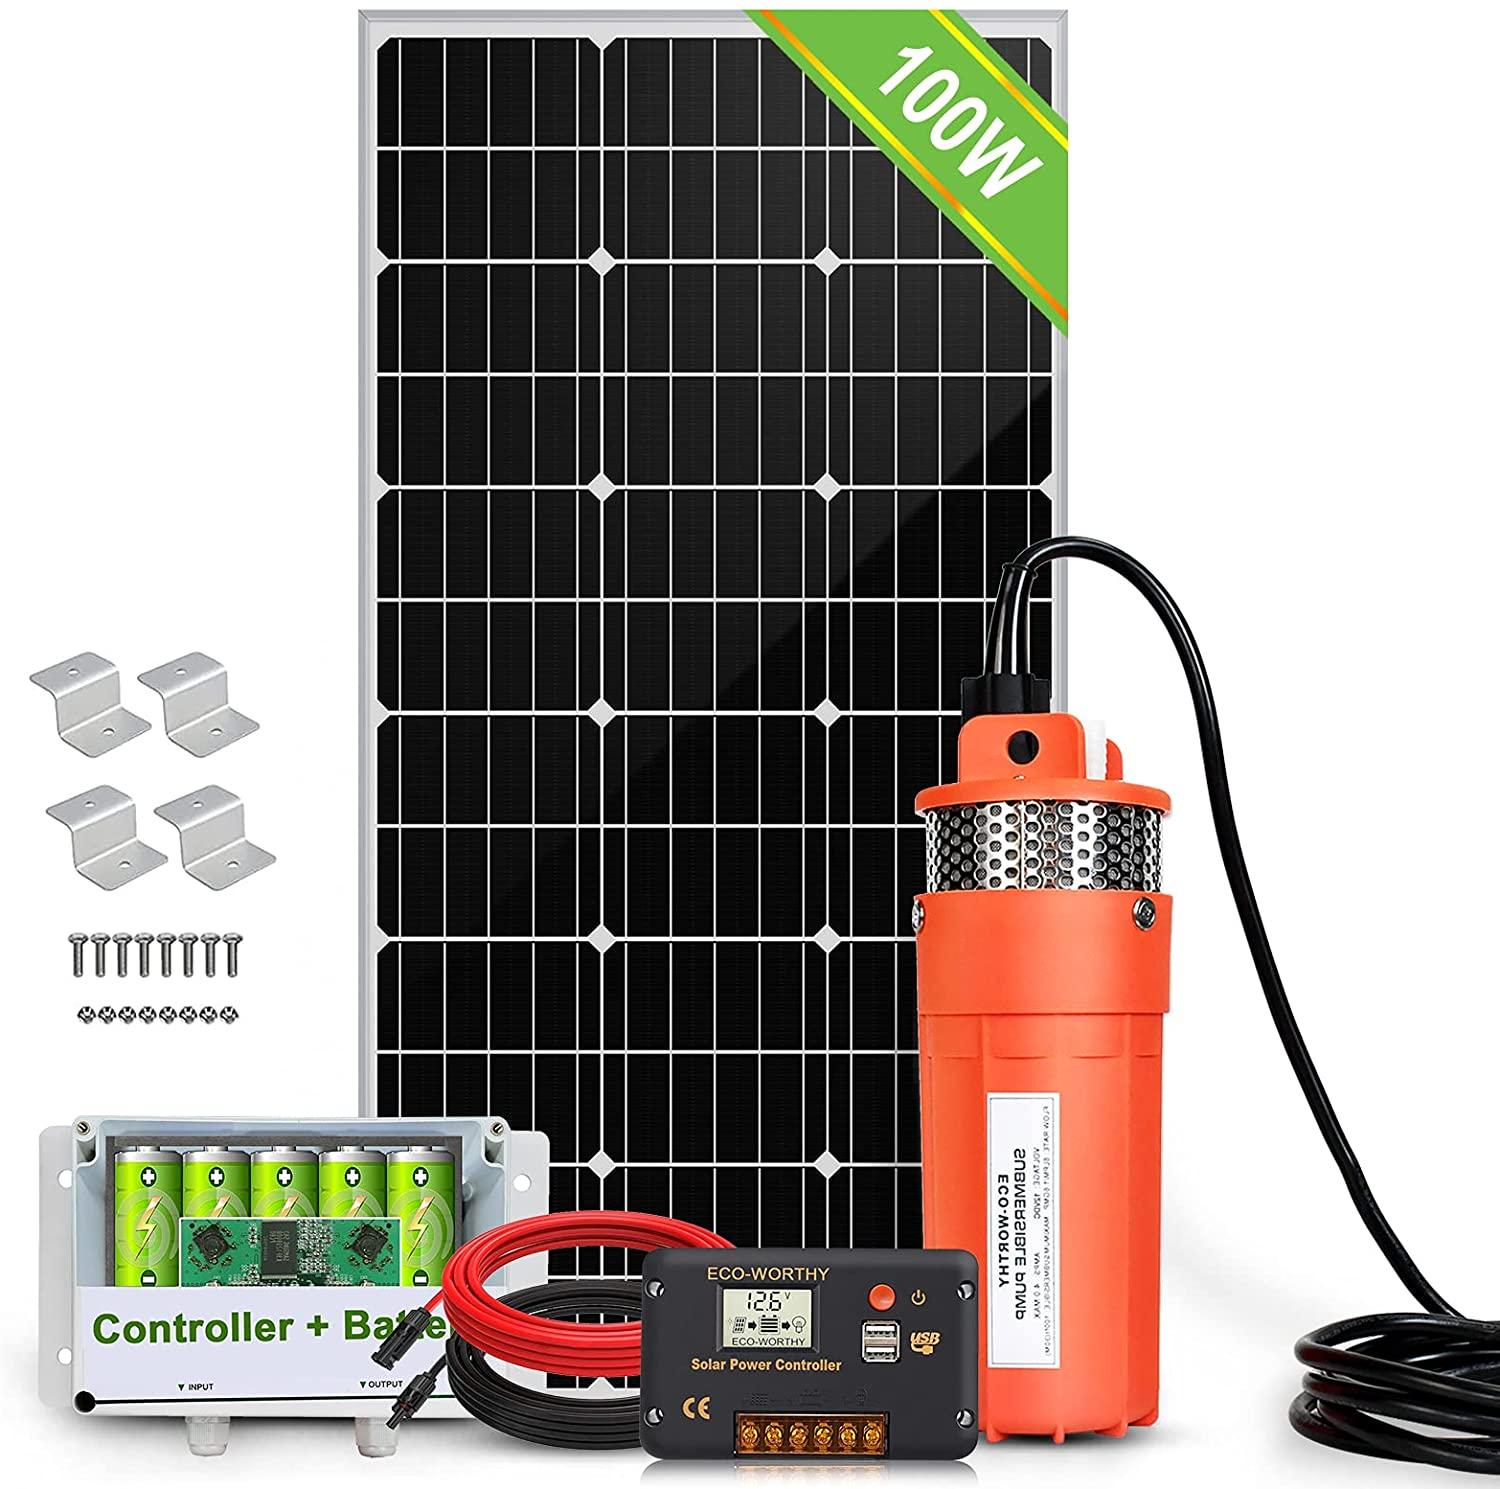 ECO-WORTHY Solar Well Pump Kit with Battery Backup, 12V Solar Water Pump +  100W Solar Panel Kit + 8Ah Battery for Well, Irrigation, Filling Water  Tank-DELIVERY IN 3 PARCELS – doxsap